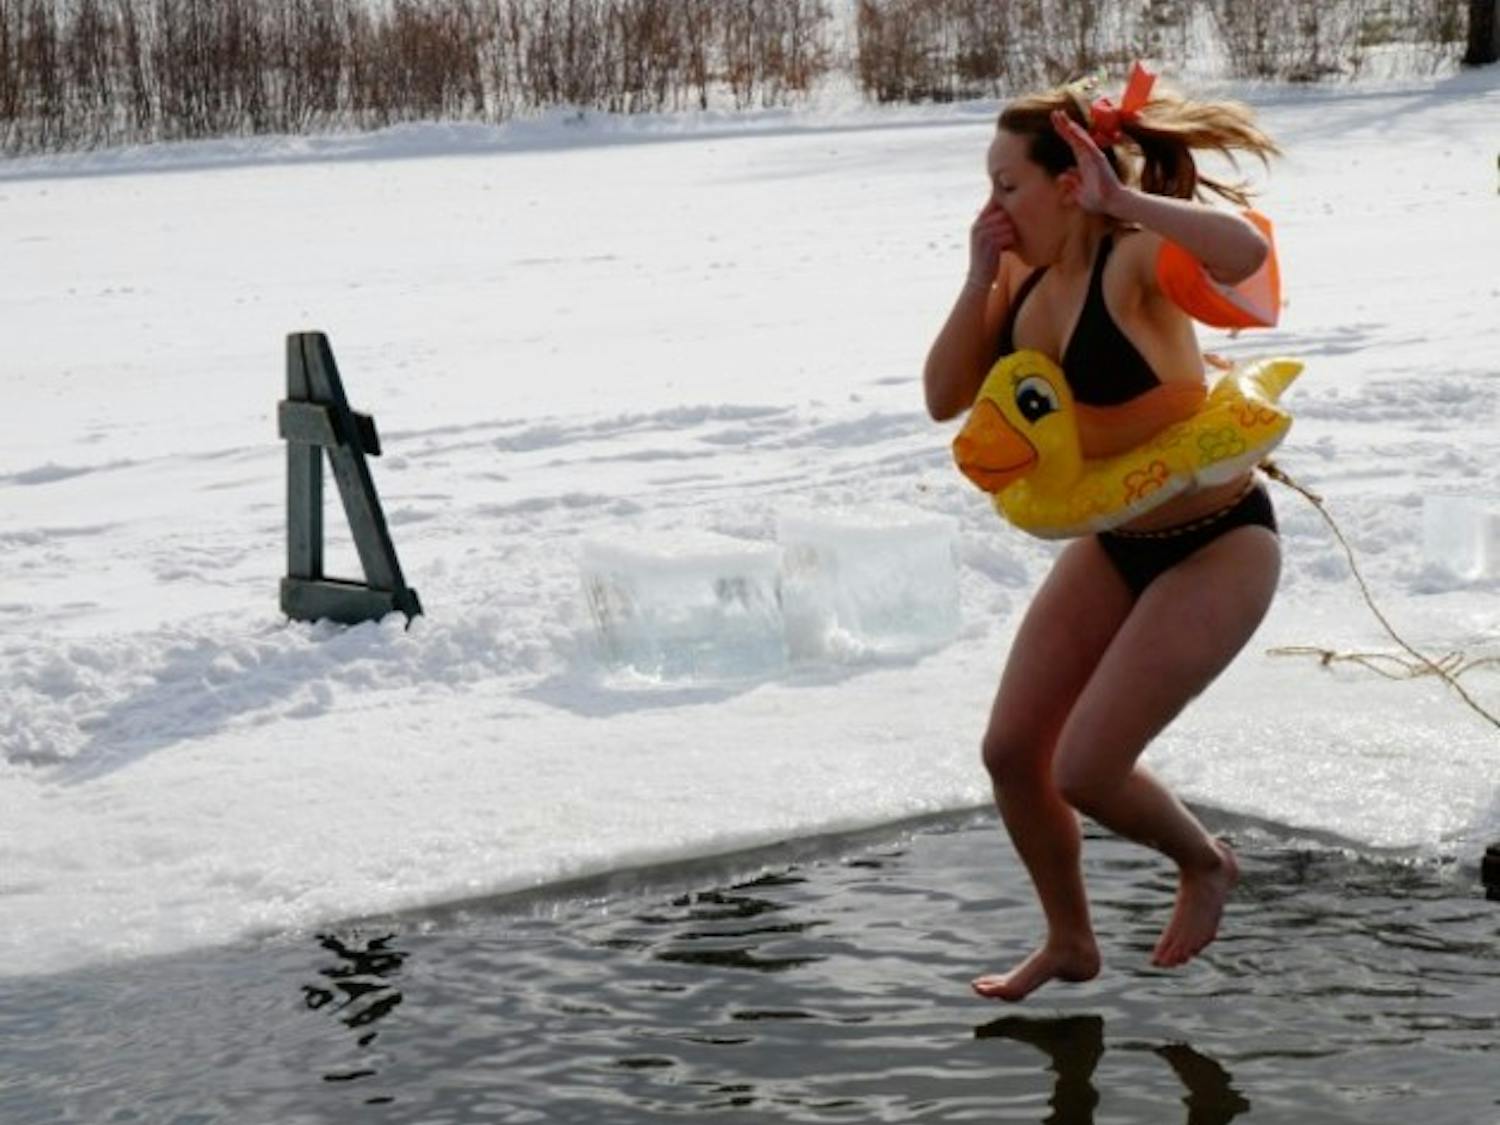 A student and her inflatable duck take part in Saturday's polar bear swim.